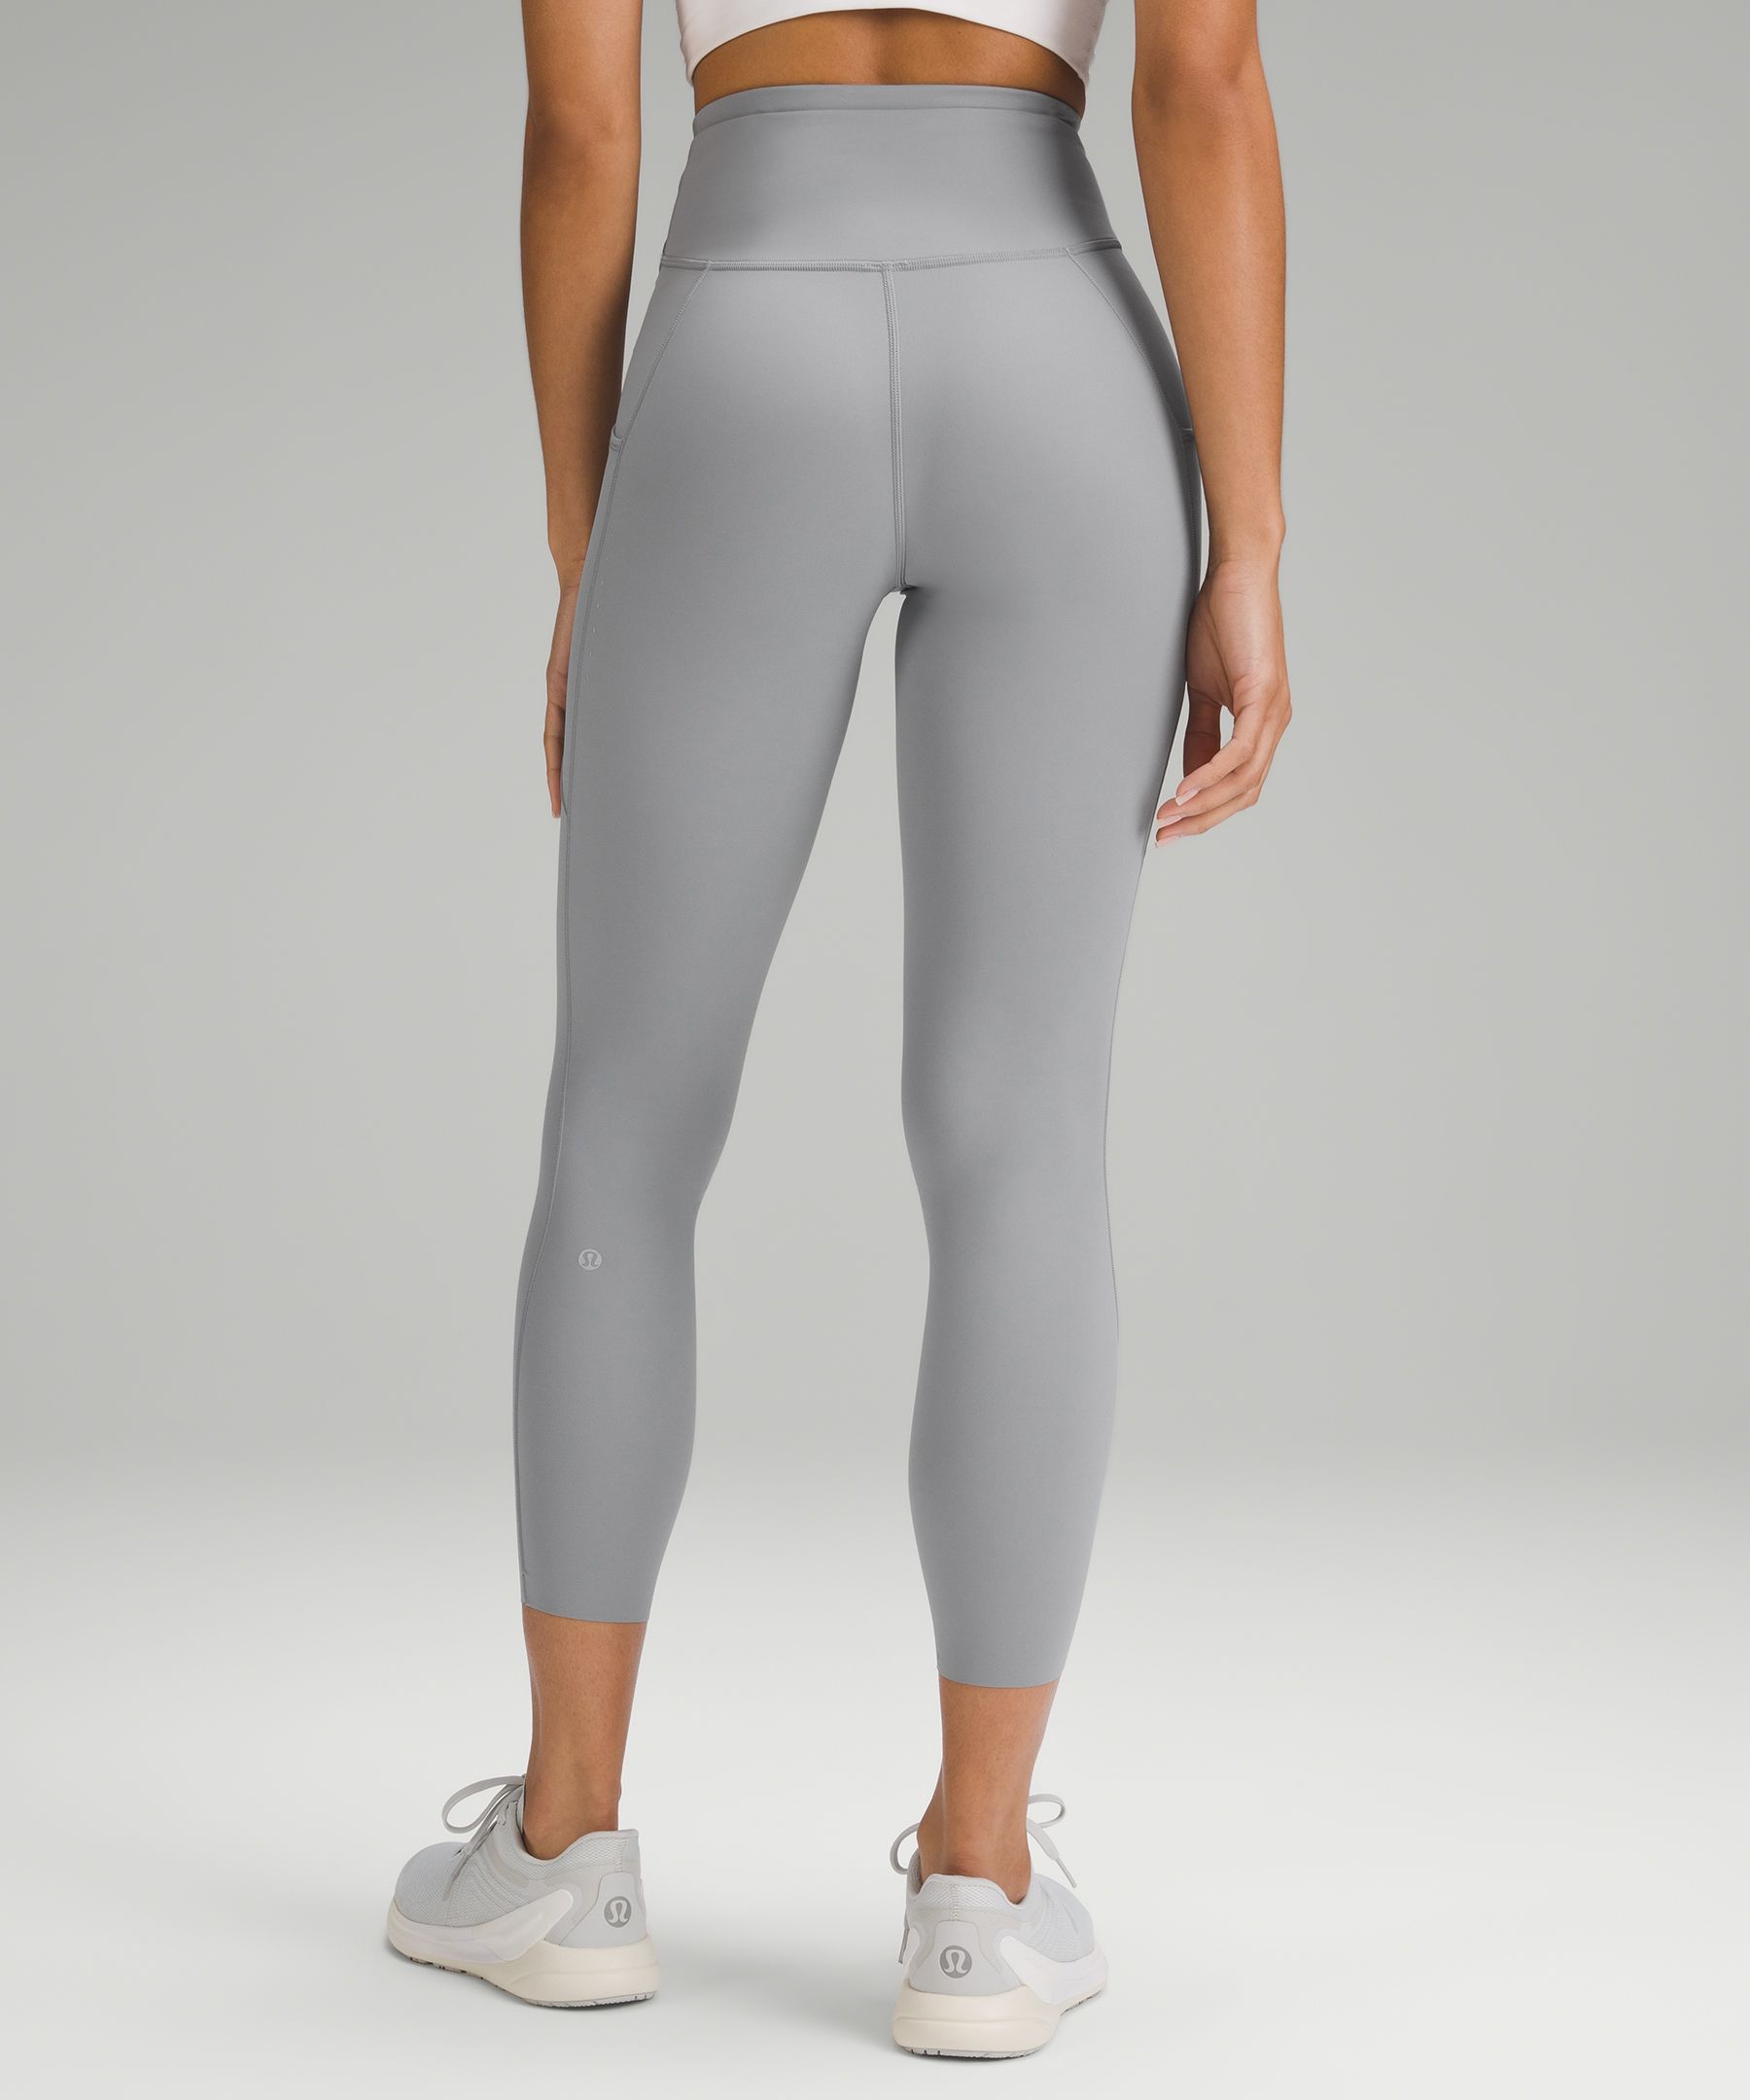 Lululemon Dark Olive Fast and Free High Rise Tight 25” Green Size 2 - $19  (85% Off Retail) - From leili